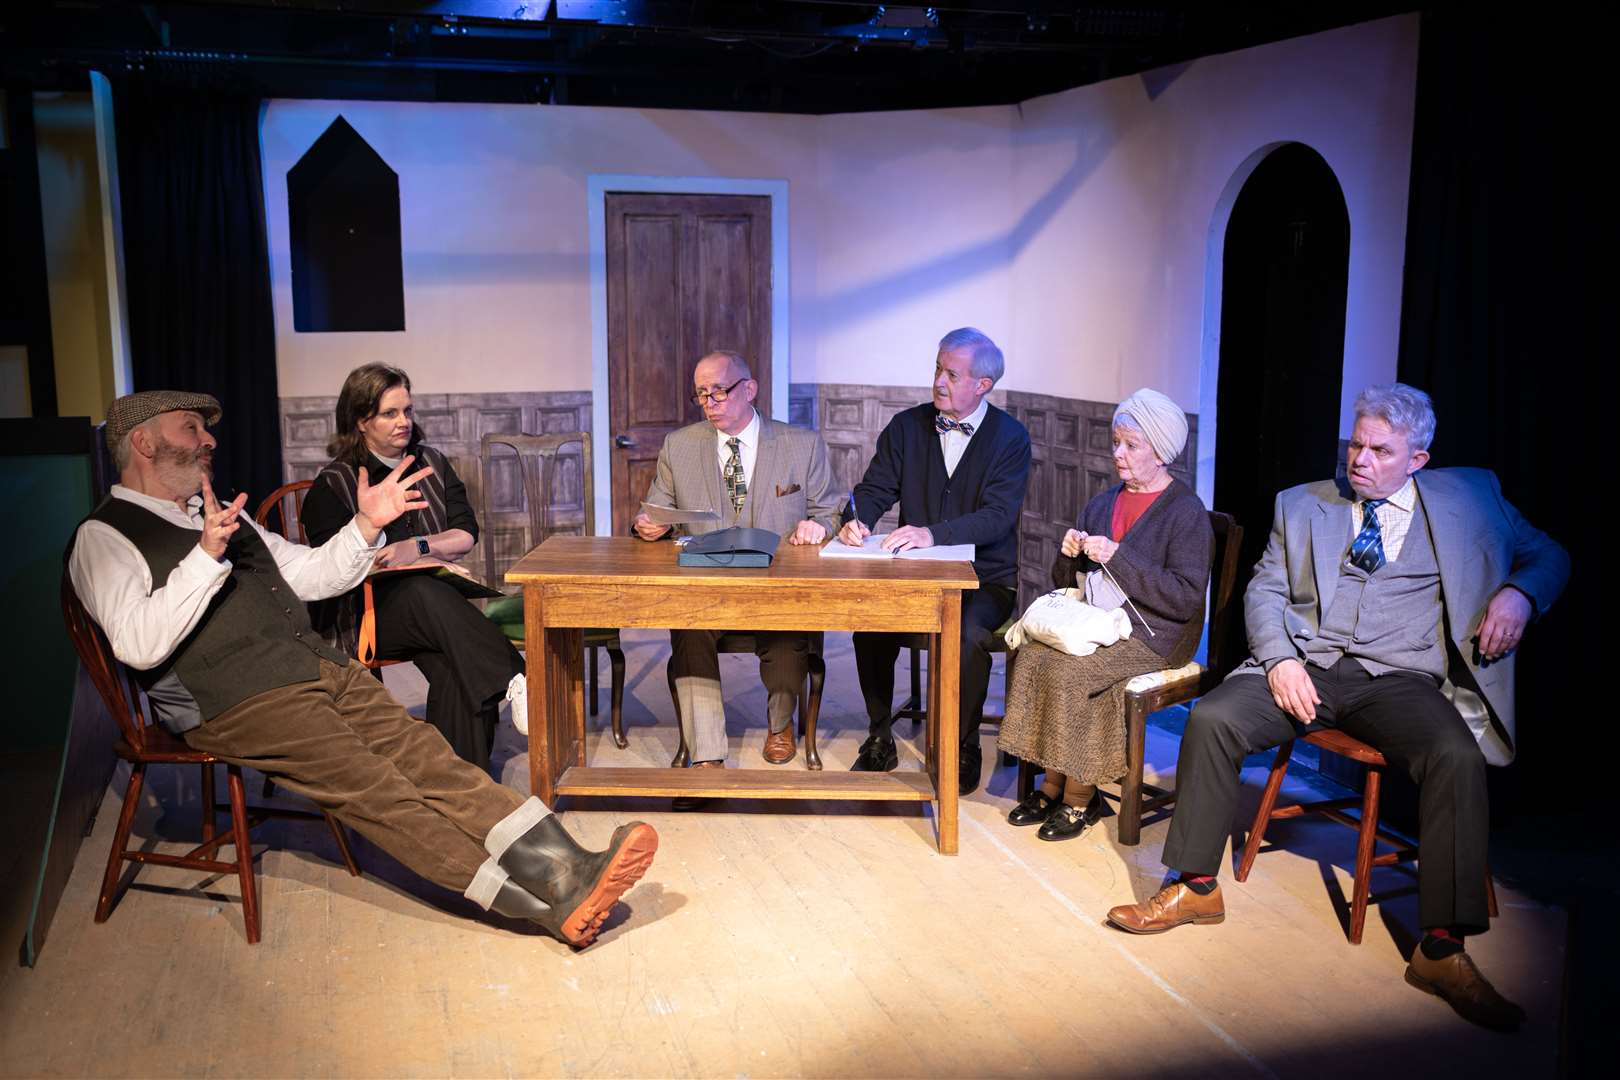 Dibley's loyal church committee plans community events, comedy ensues. From left – Martin Anderson as Owen, Lesley Mitchell as Geraldine, Nicholas Nicol as Hugo, Ian Shearer as Frank, Anna Bamborough as Letitia and Trevor Nicol as Jim. Picture: Alison Ozog